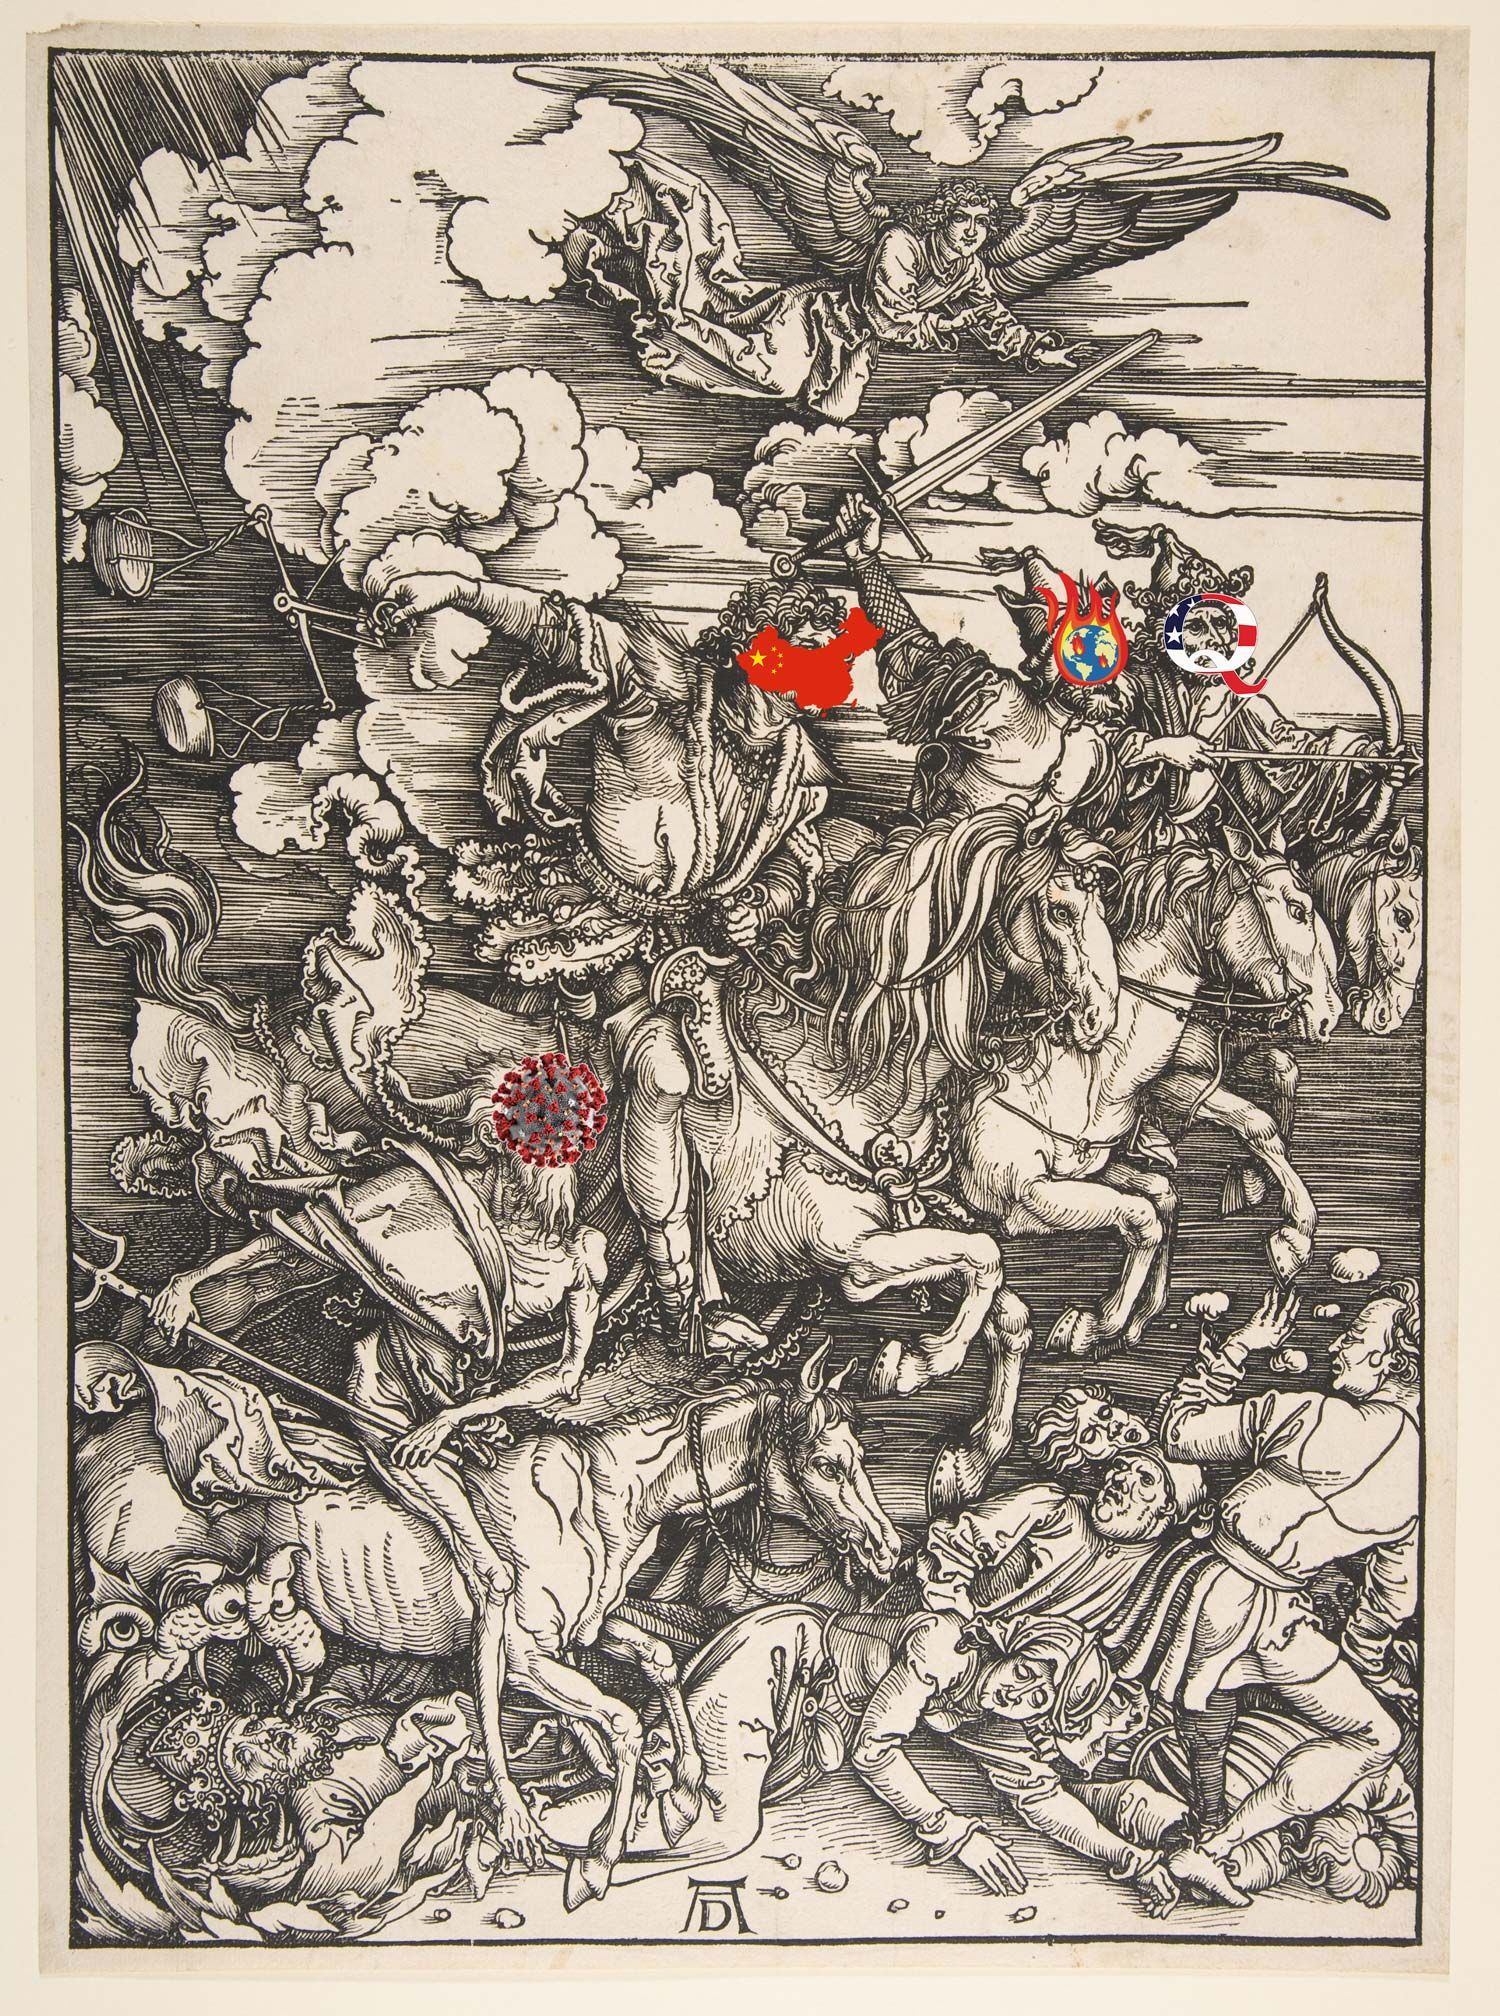 Four Horsemen of the Apocalypse by Albrecht Dürer with Qanon, China, the Coronavirus and a flaming earth over the horsemen’s faces.